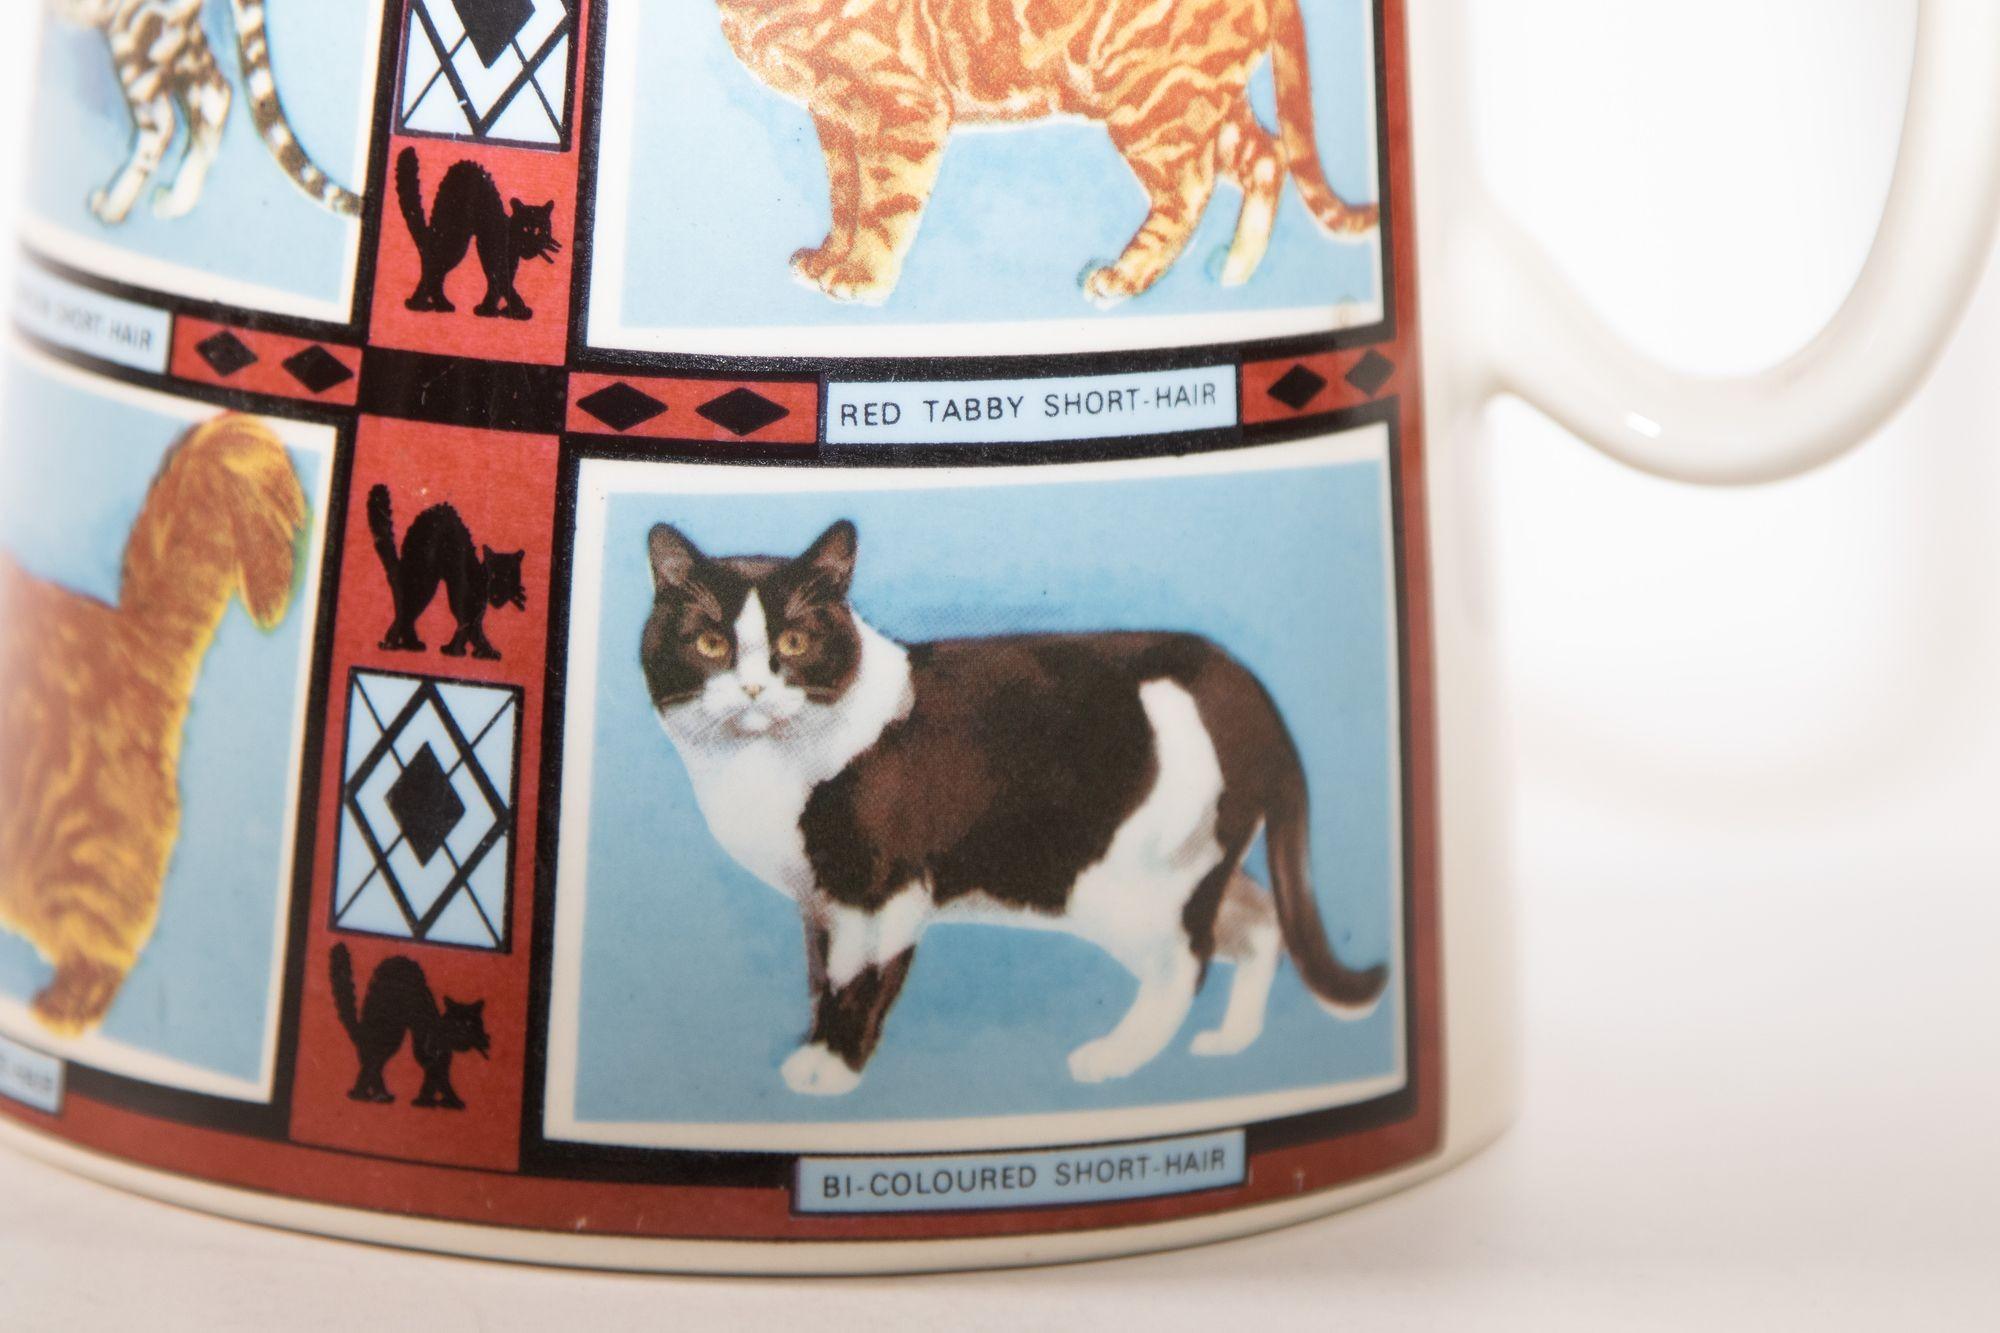 20th Century Vintage 1970s Ceramic Pitcher, Derbyshire England with Cat Breeds Pictures